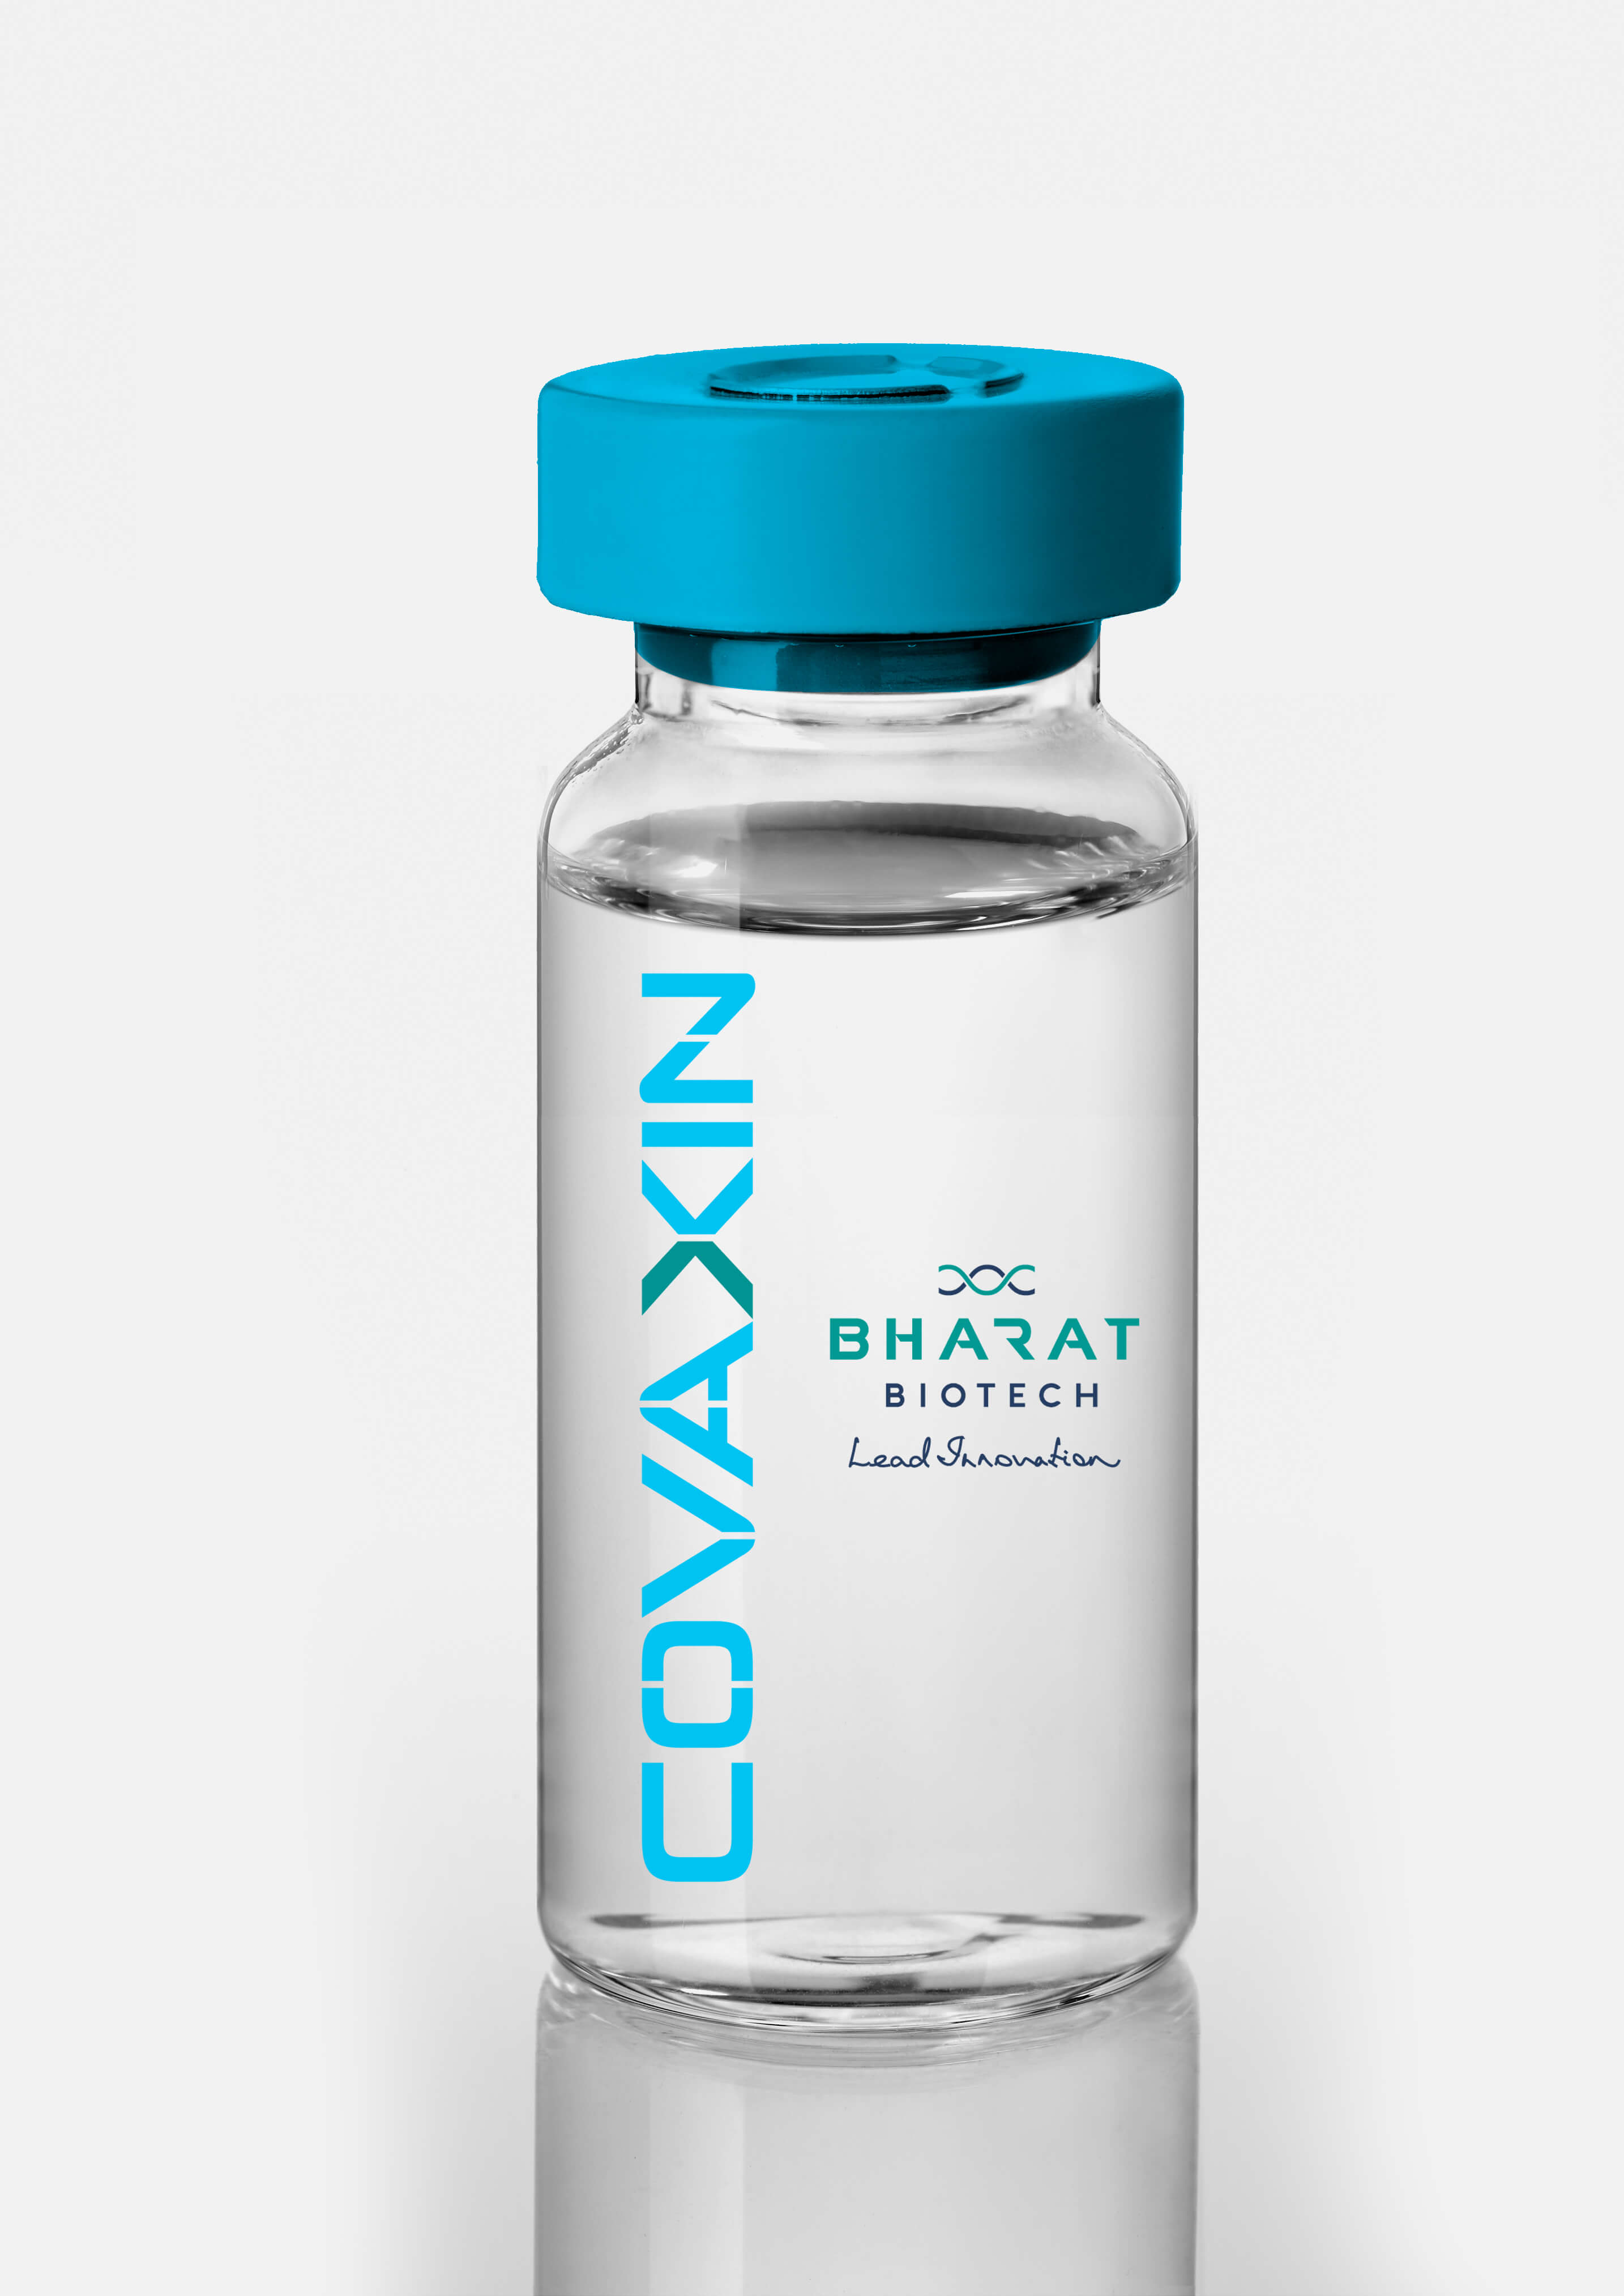 Rs 150/dose for Covaxin not sustainable: Bharat Biotech